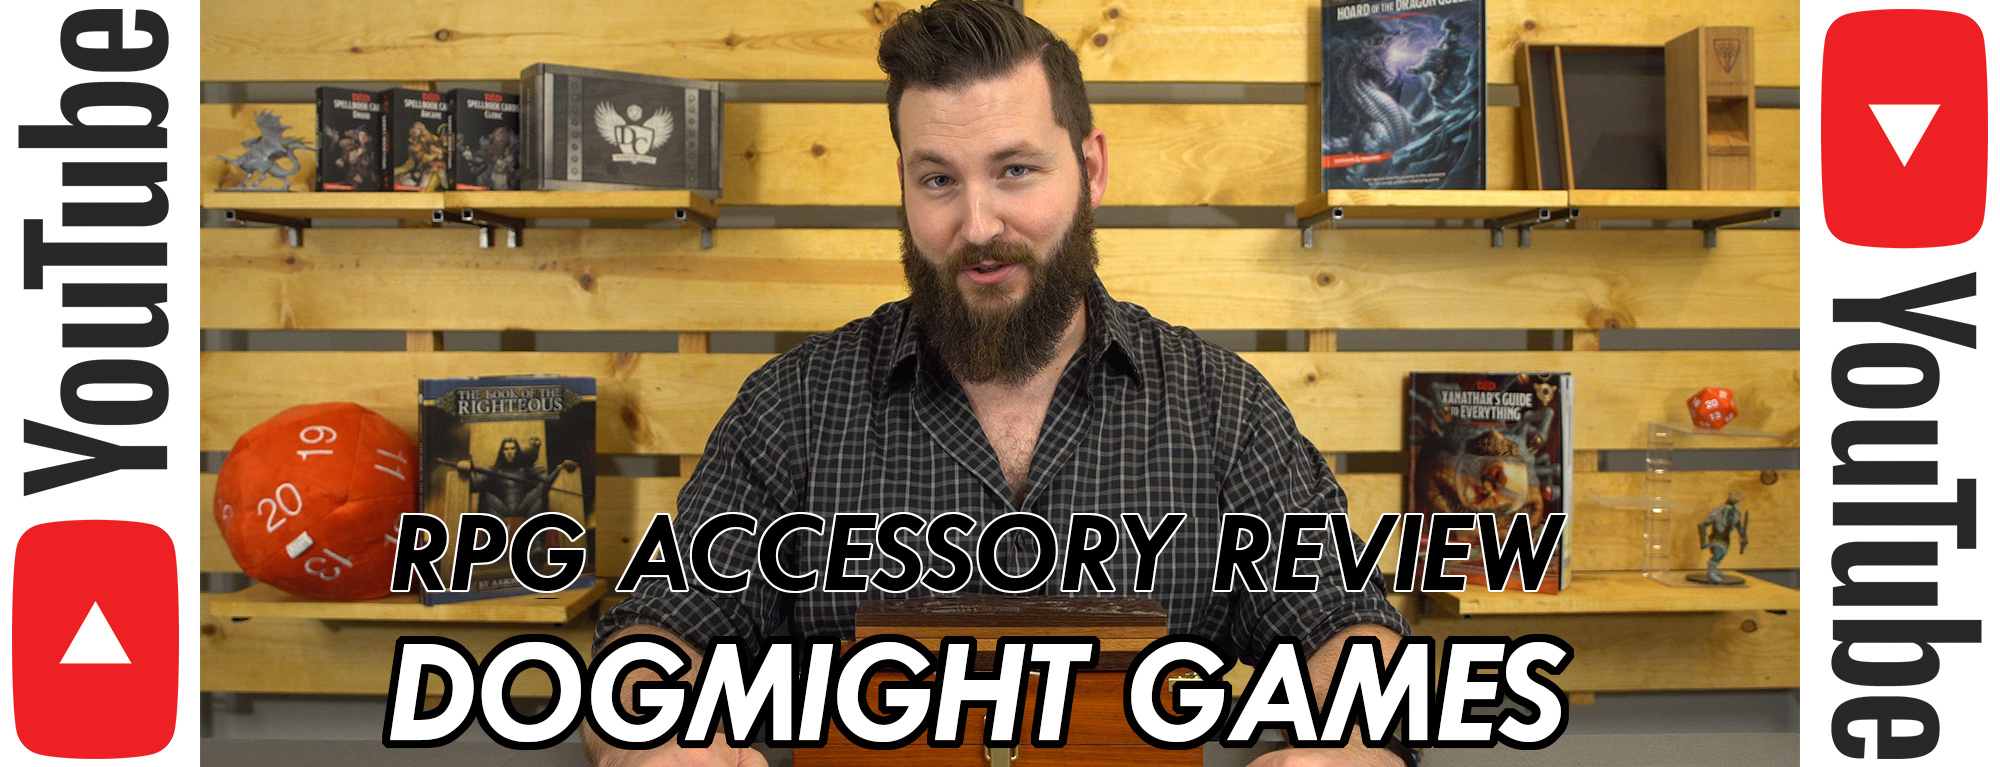 DogMight RPG Accessory Review - Dungeons and Dragons